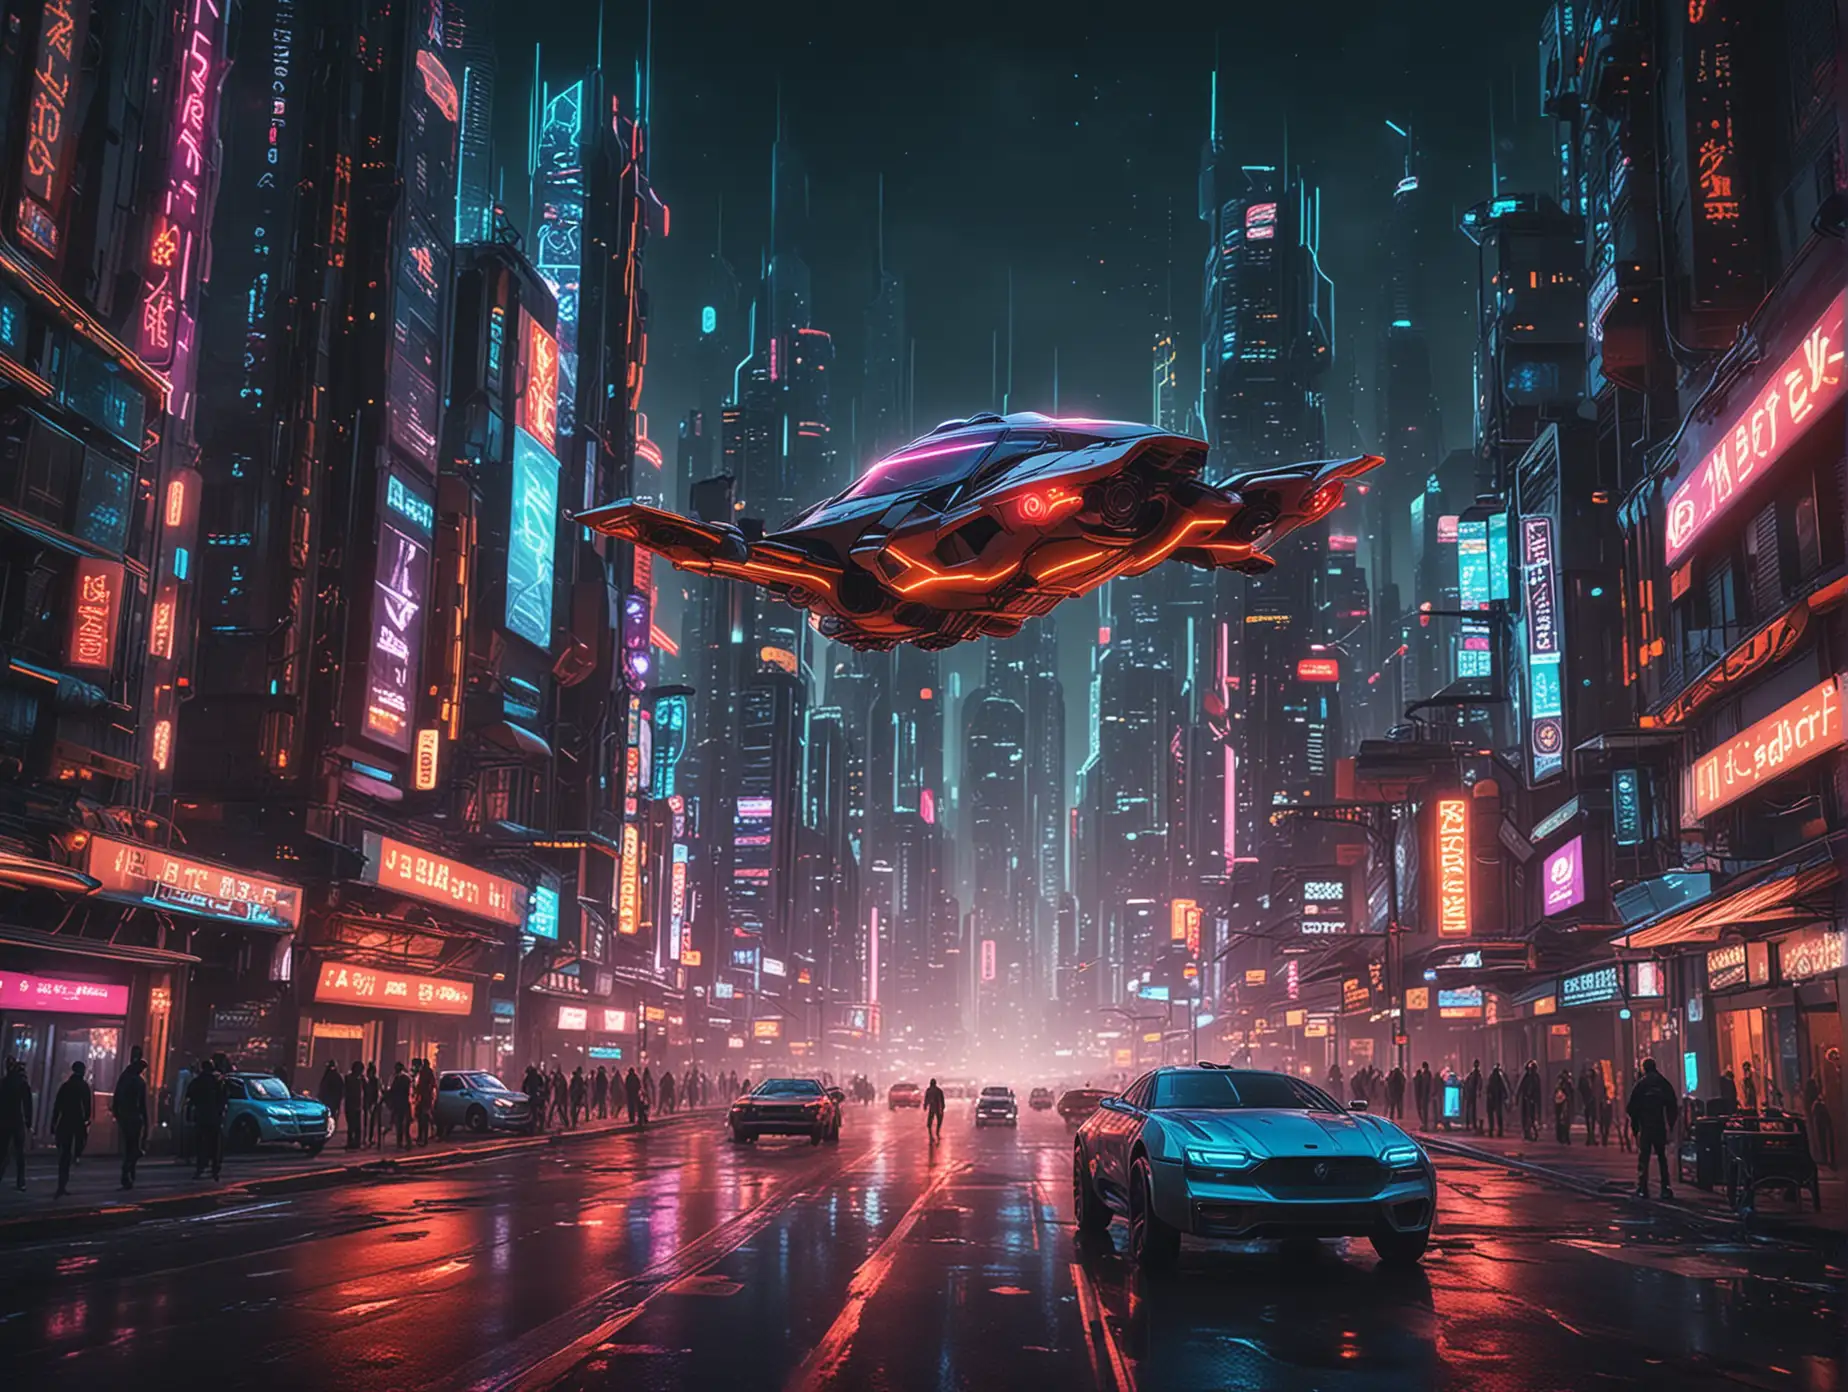 Futuristic-Cityscape-with-Robots-and-Flying-Cars-at-Night